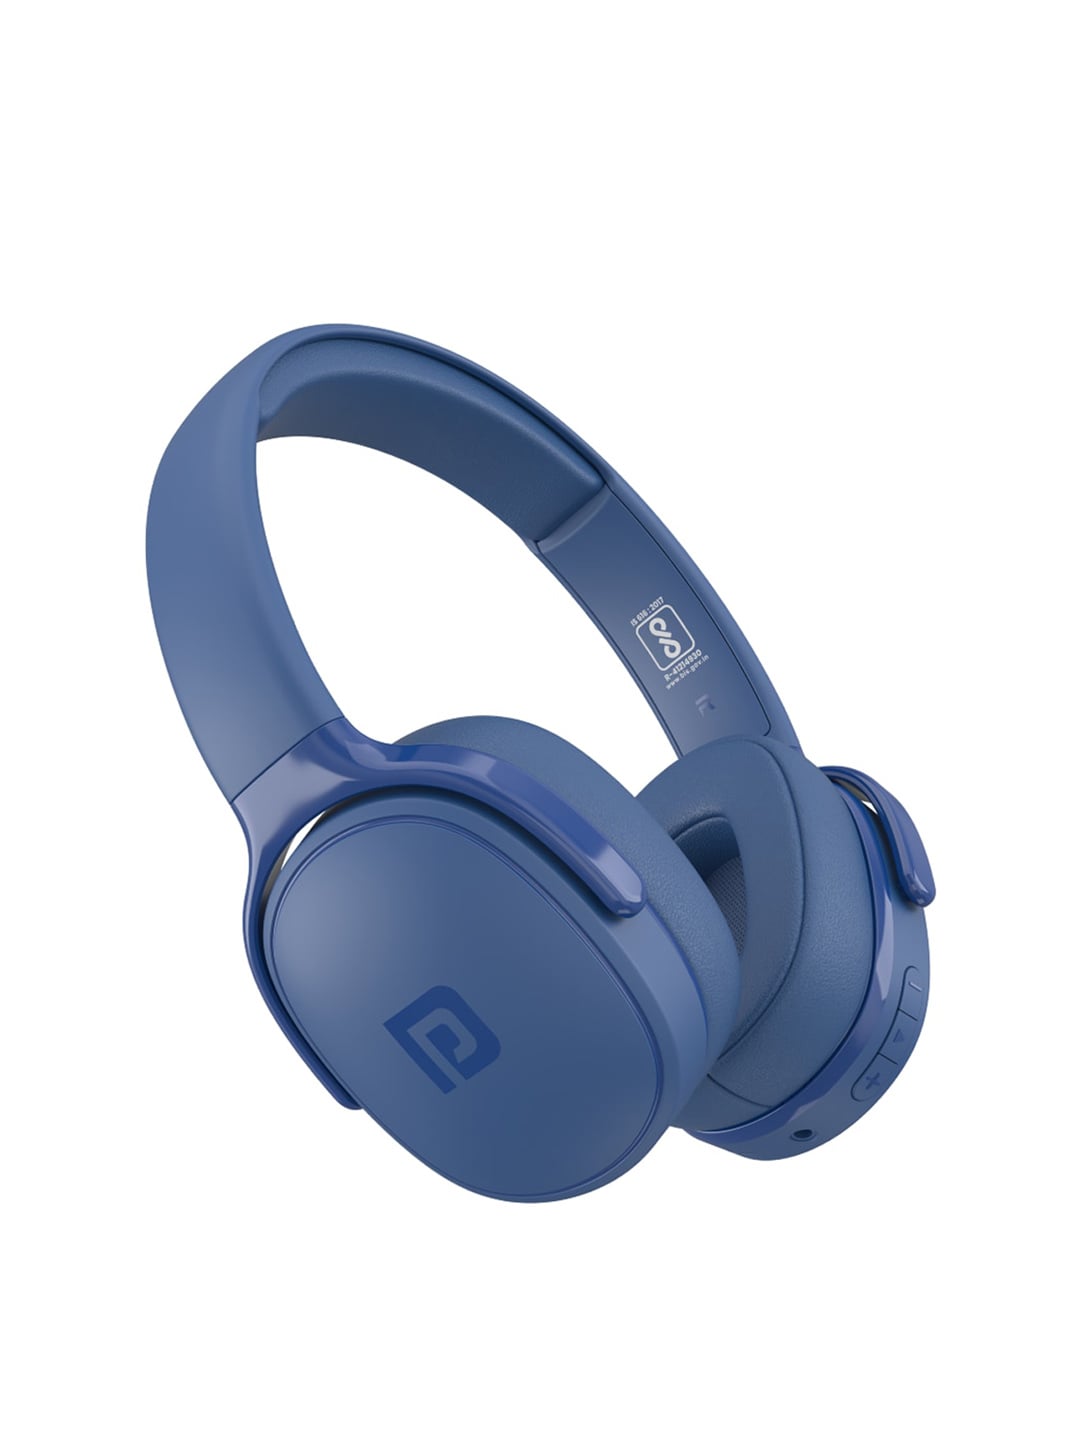 Portronics Blue Muffs A Bluetooth 5.0 Wireless Over The Ear Headphone Price in India